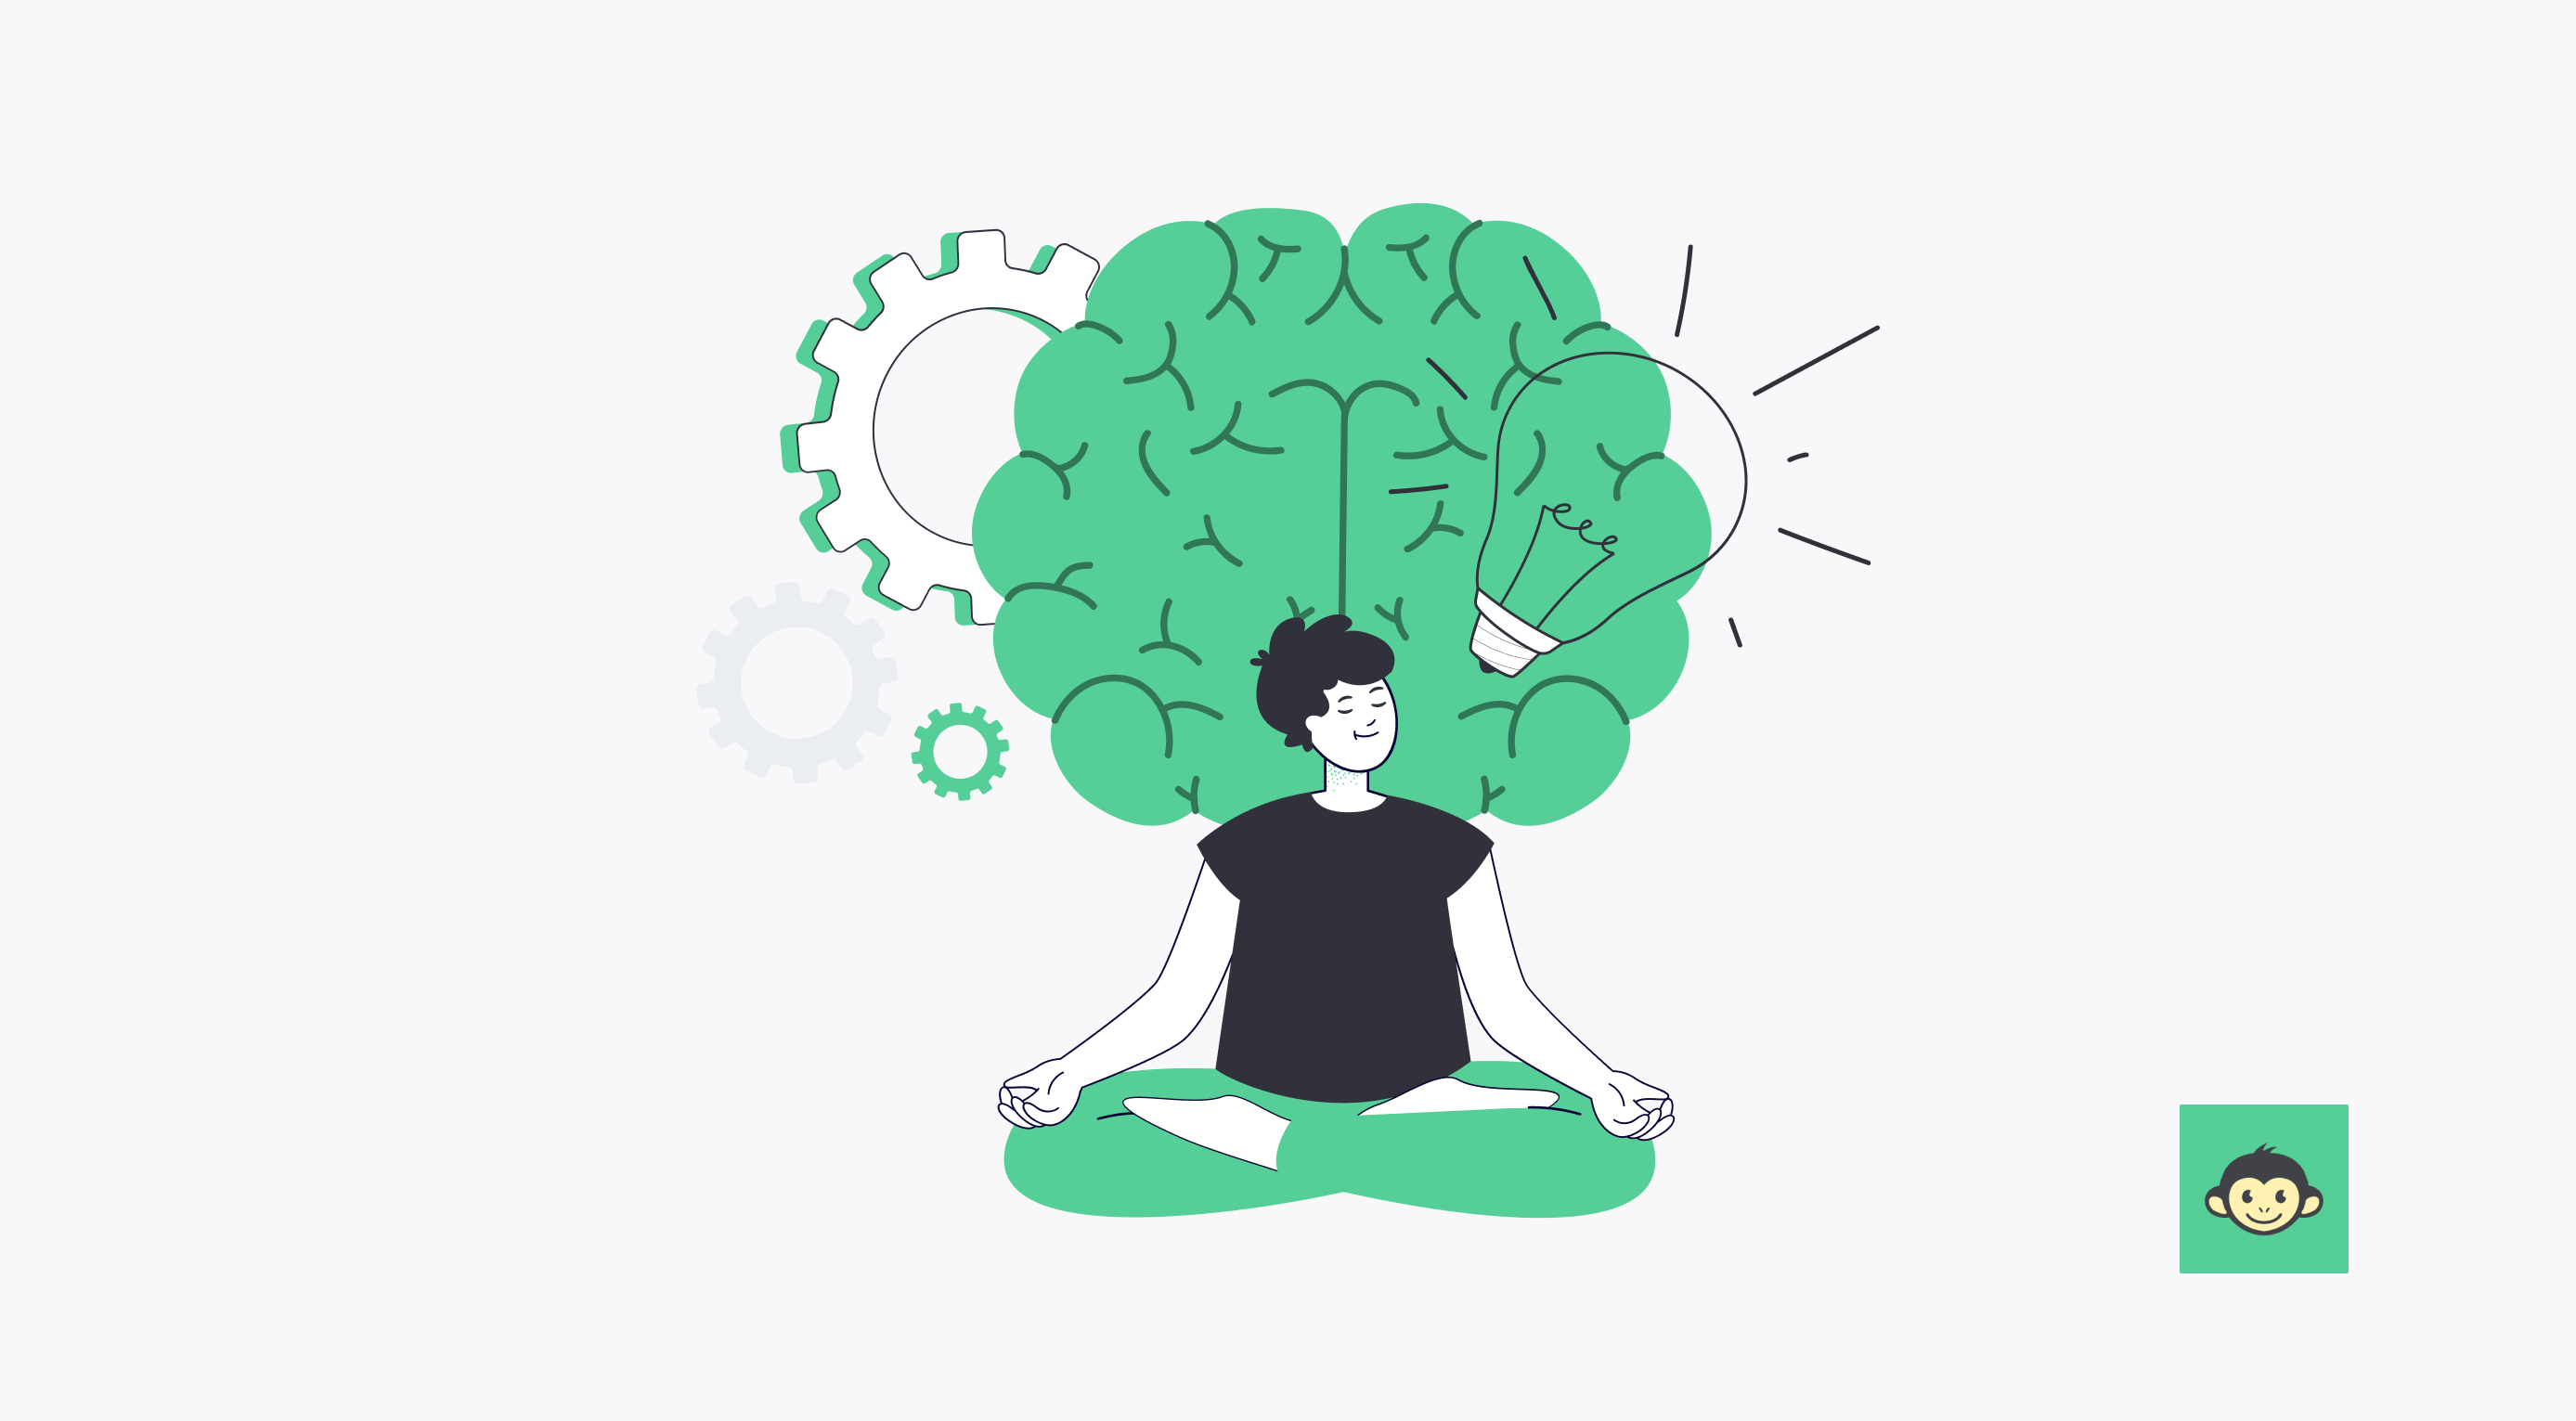 An employee is meditating while there is a huge brain image behind